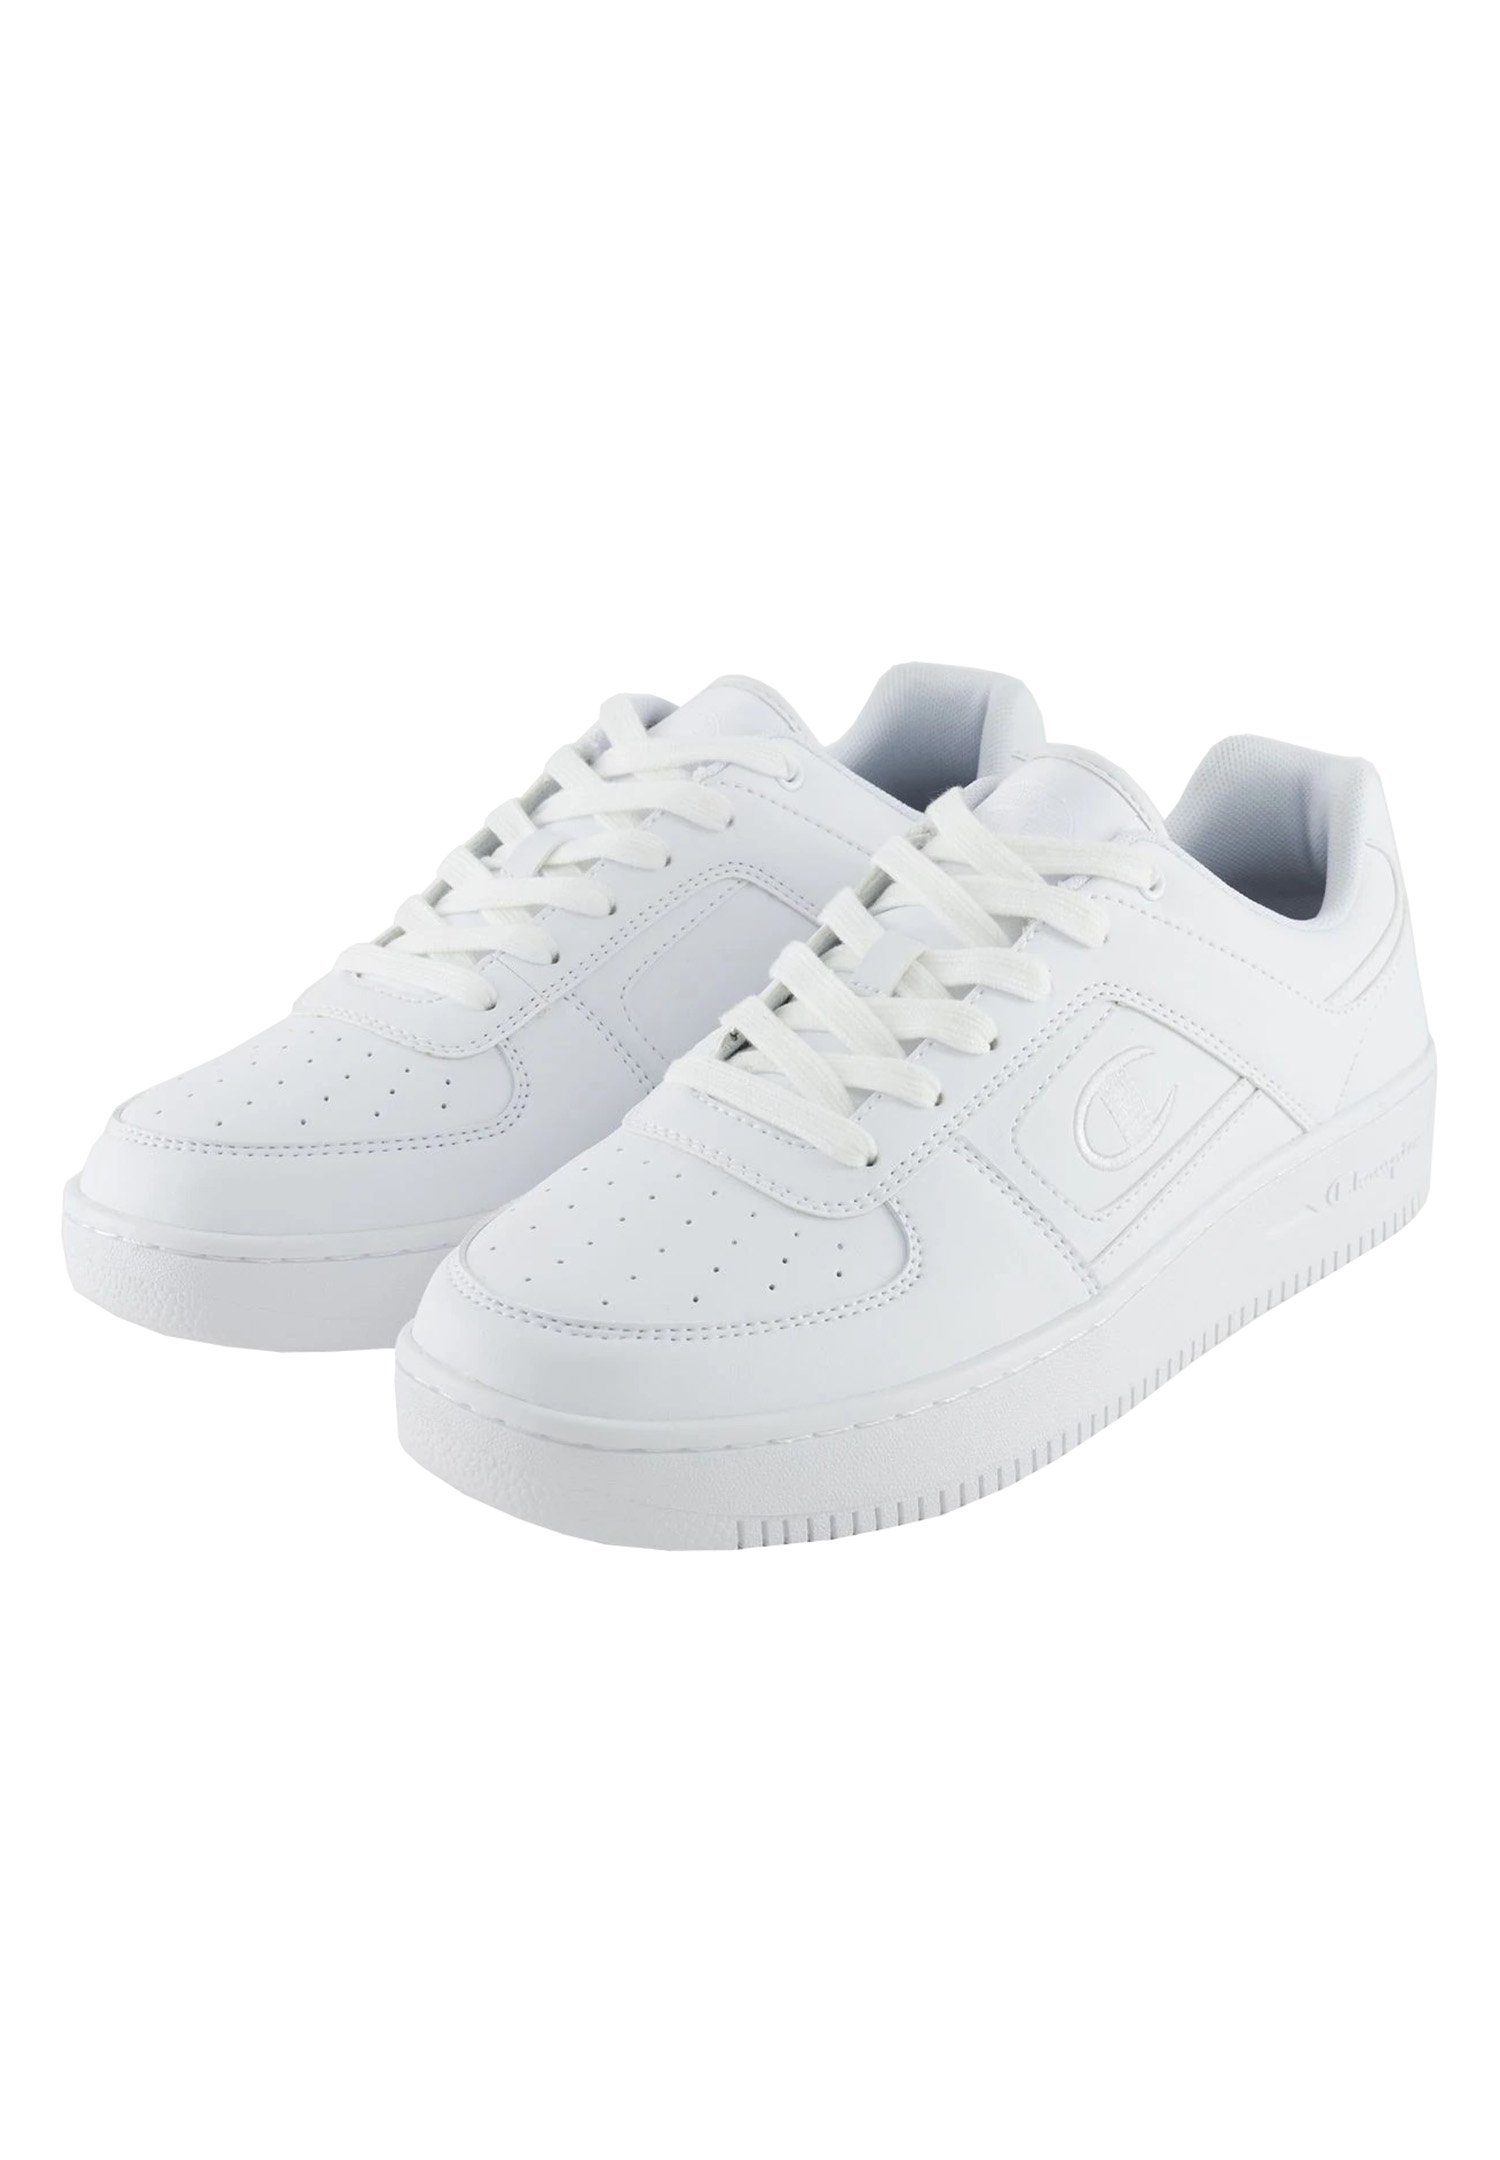 Champion FOUL PLAY ELEMENT LOW Sneaker | Fitnessschuhe